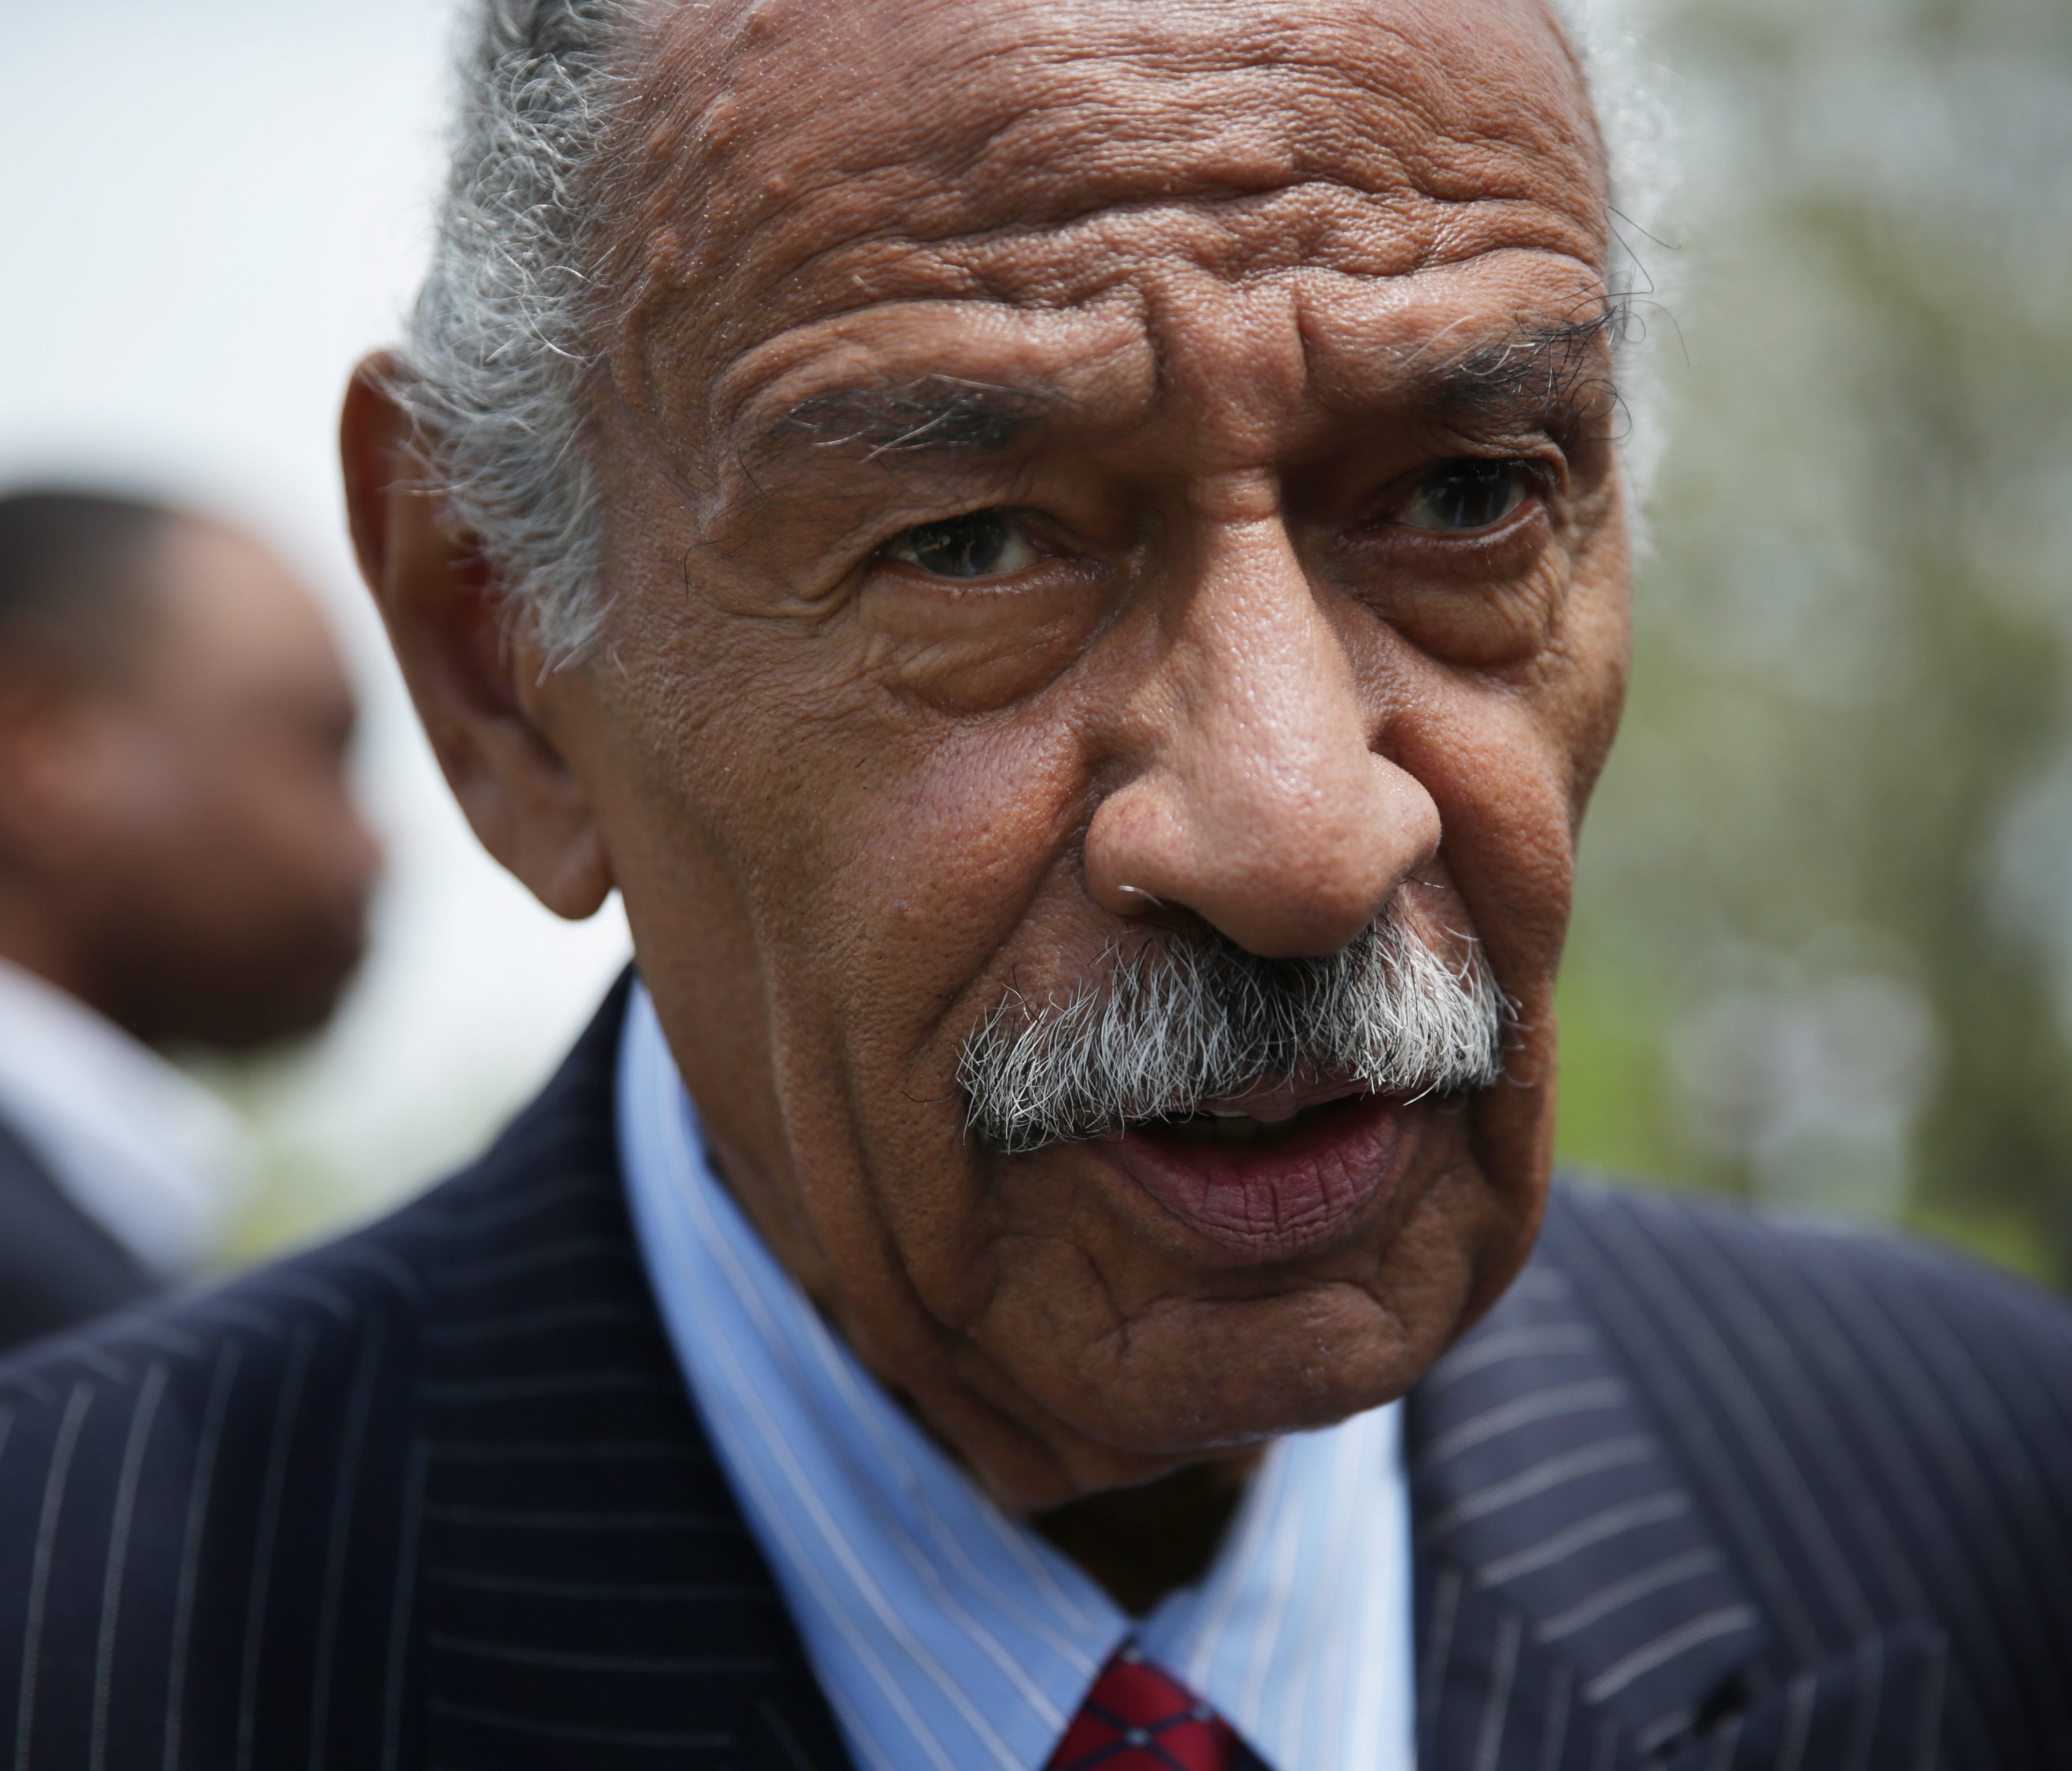 Rep. John Conyers speaks to a reporter at the end of a news conference April 22, 2015 on Capitol Hill in Washington, DC.